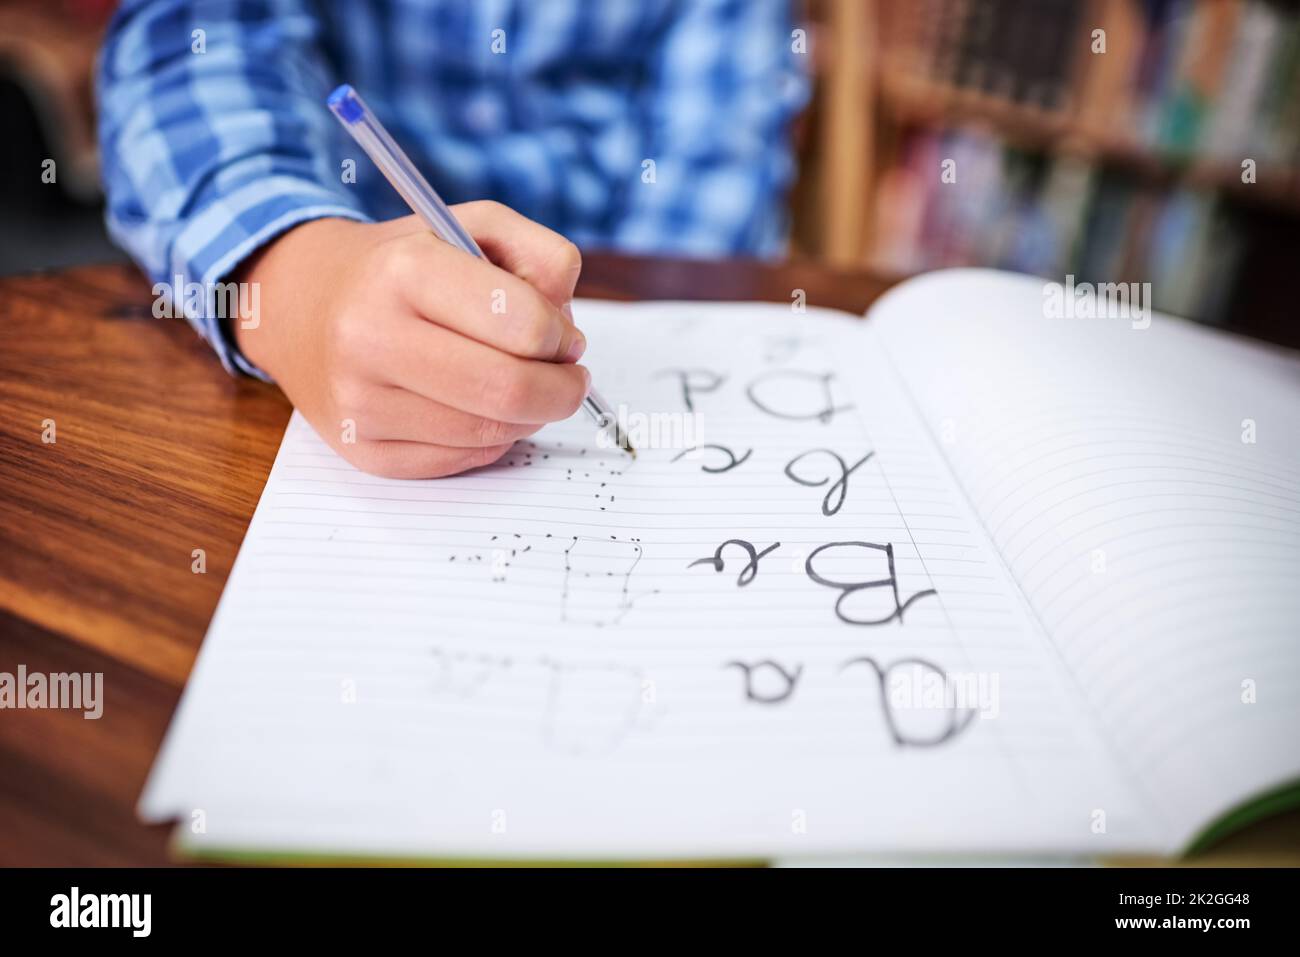 Practising his handwriting. Shot of an unrecognisable young boy writing in a book at school. Stock Photo